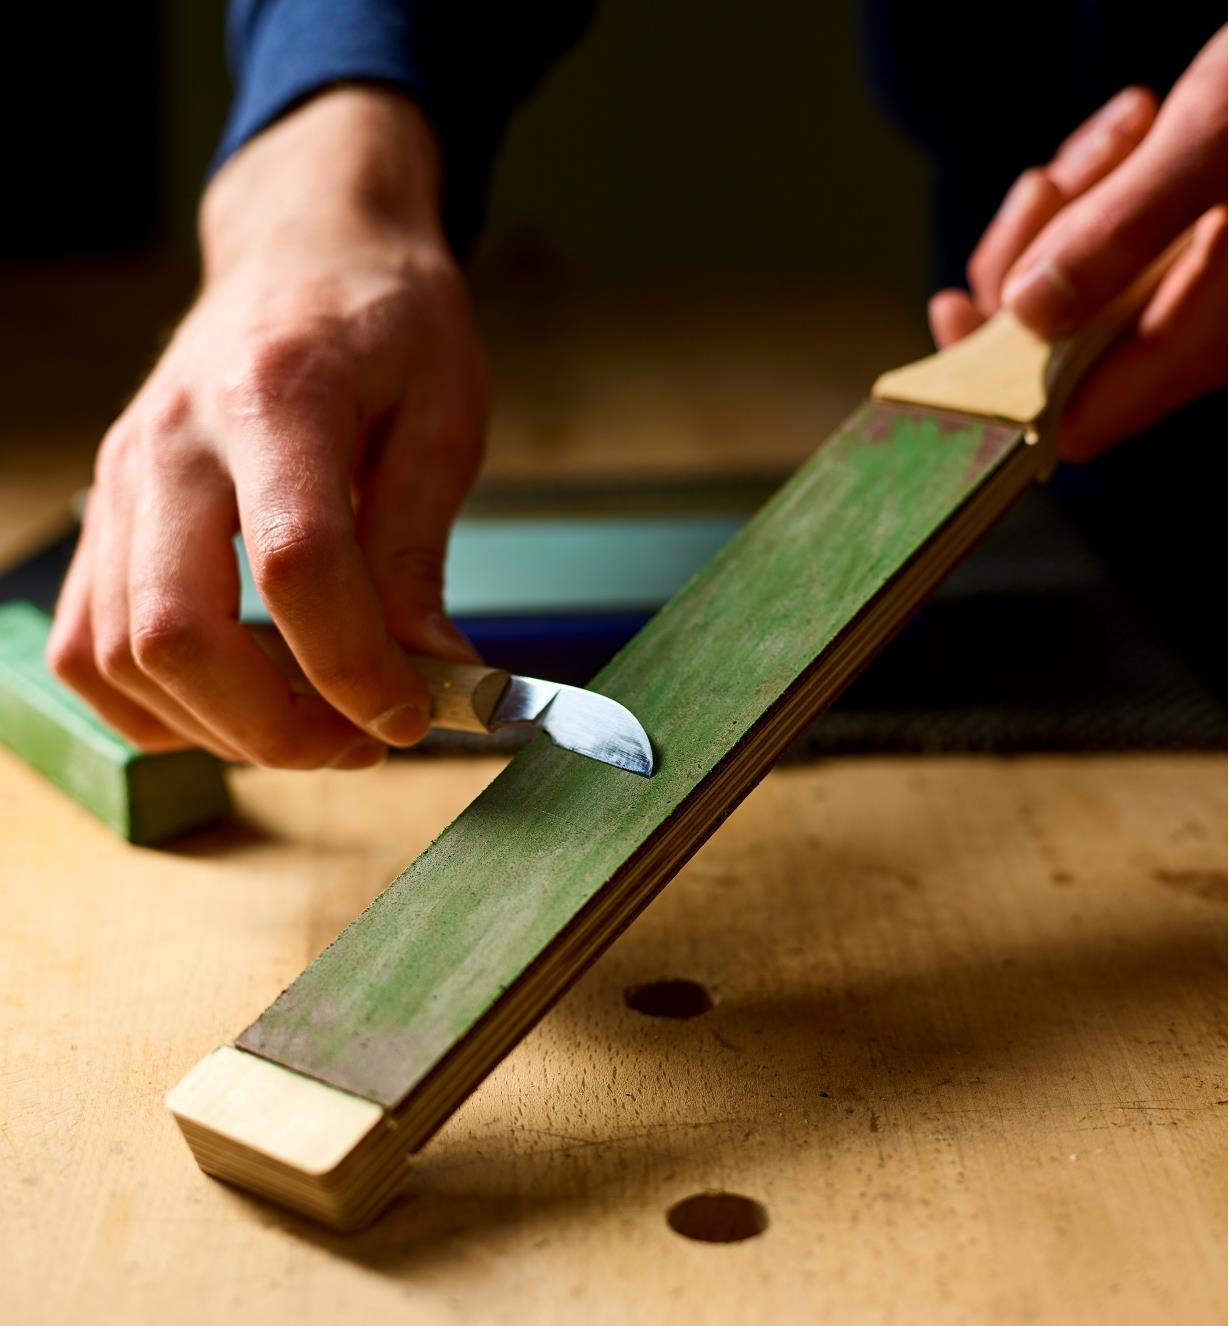 Stroping the edge of a chip carving knife on the Veritas Double-Sided Hand Strop charged with Veritas Honing Compound